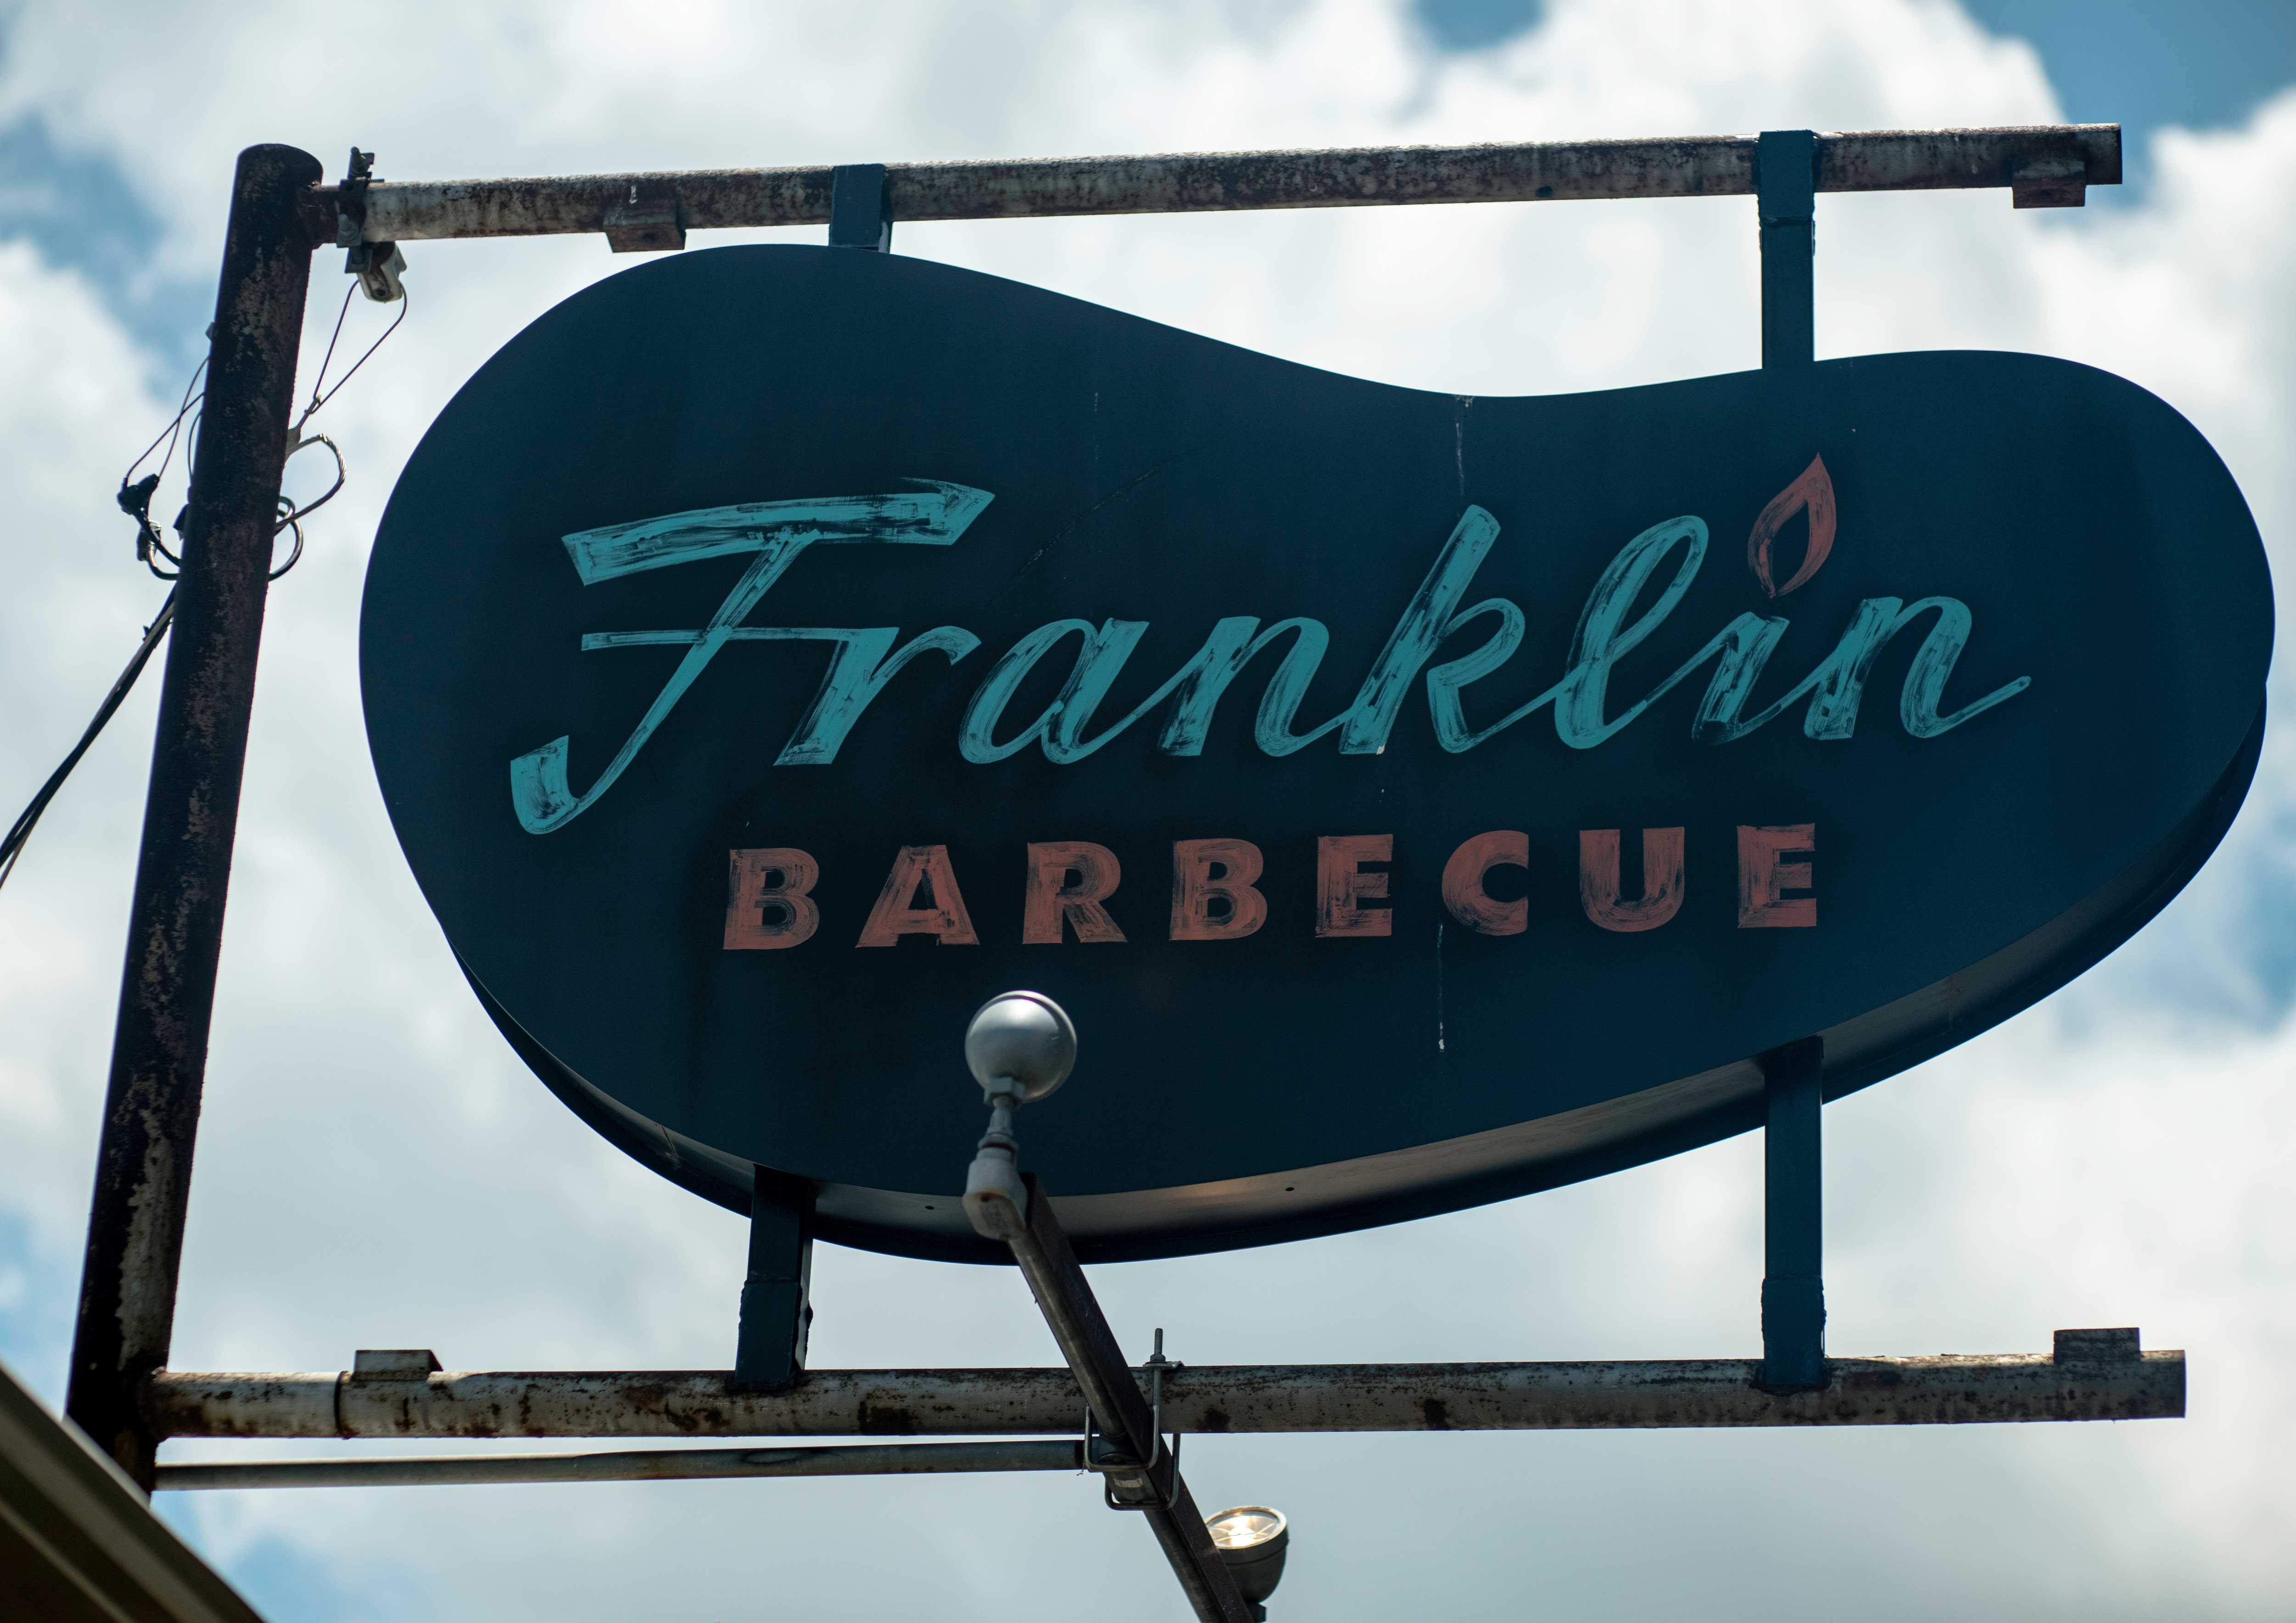 Franklin Barbecue sign in Austin, Texas.